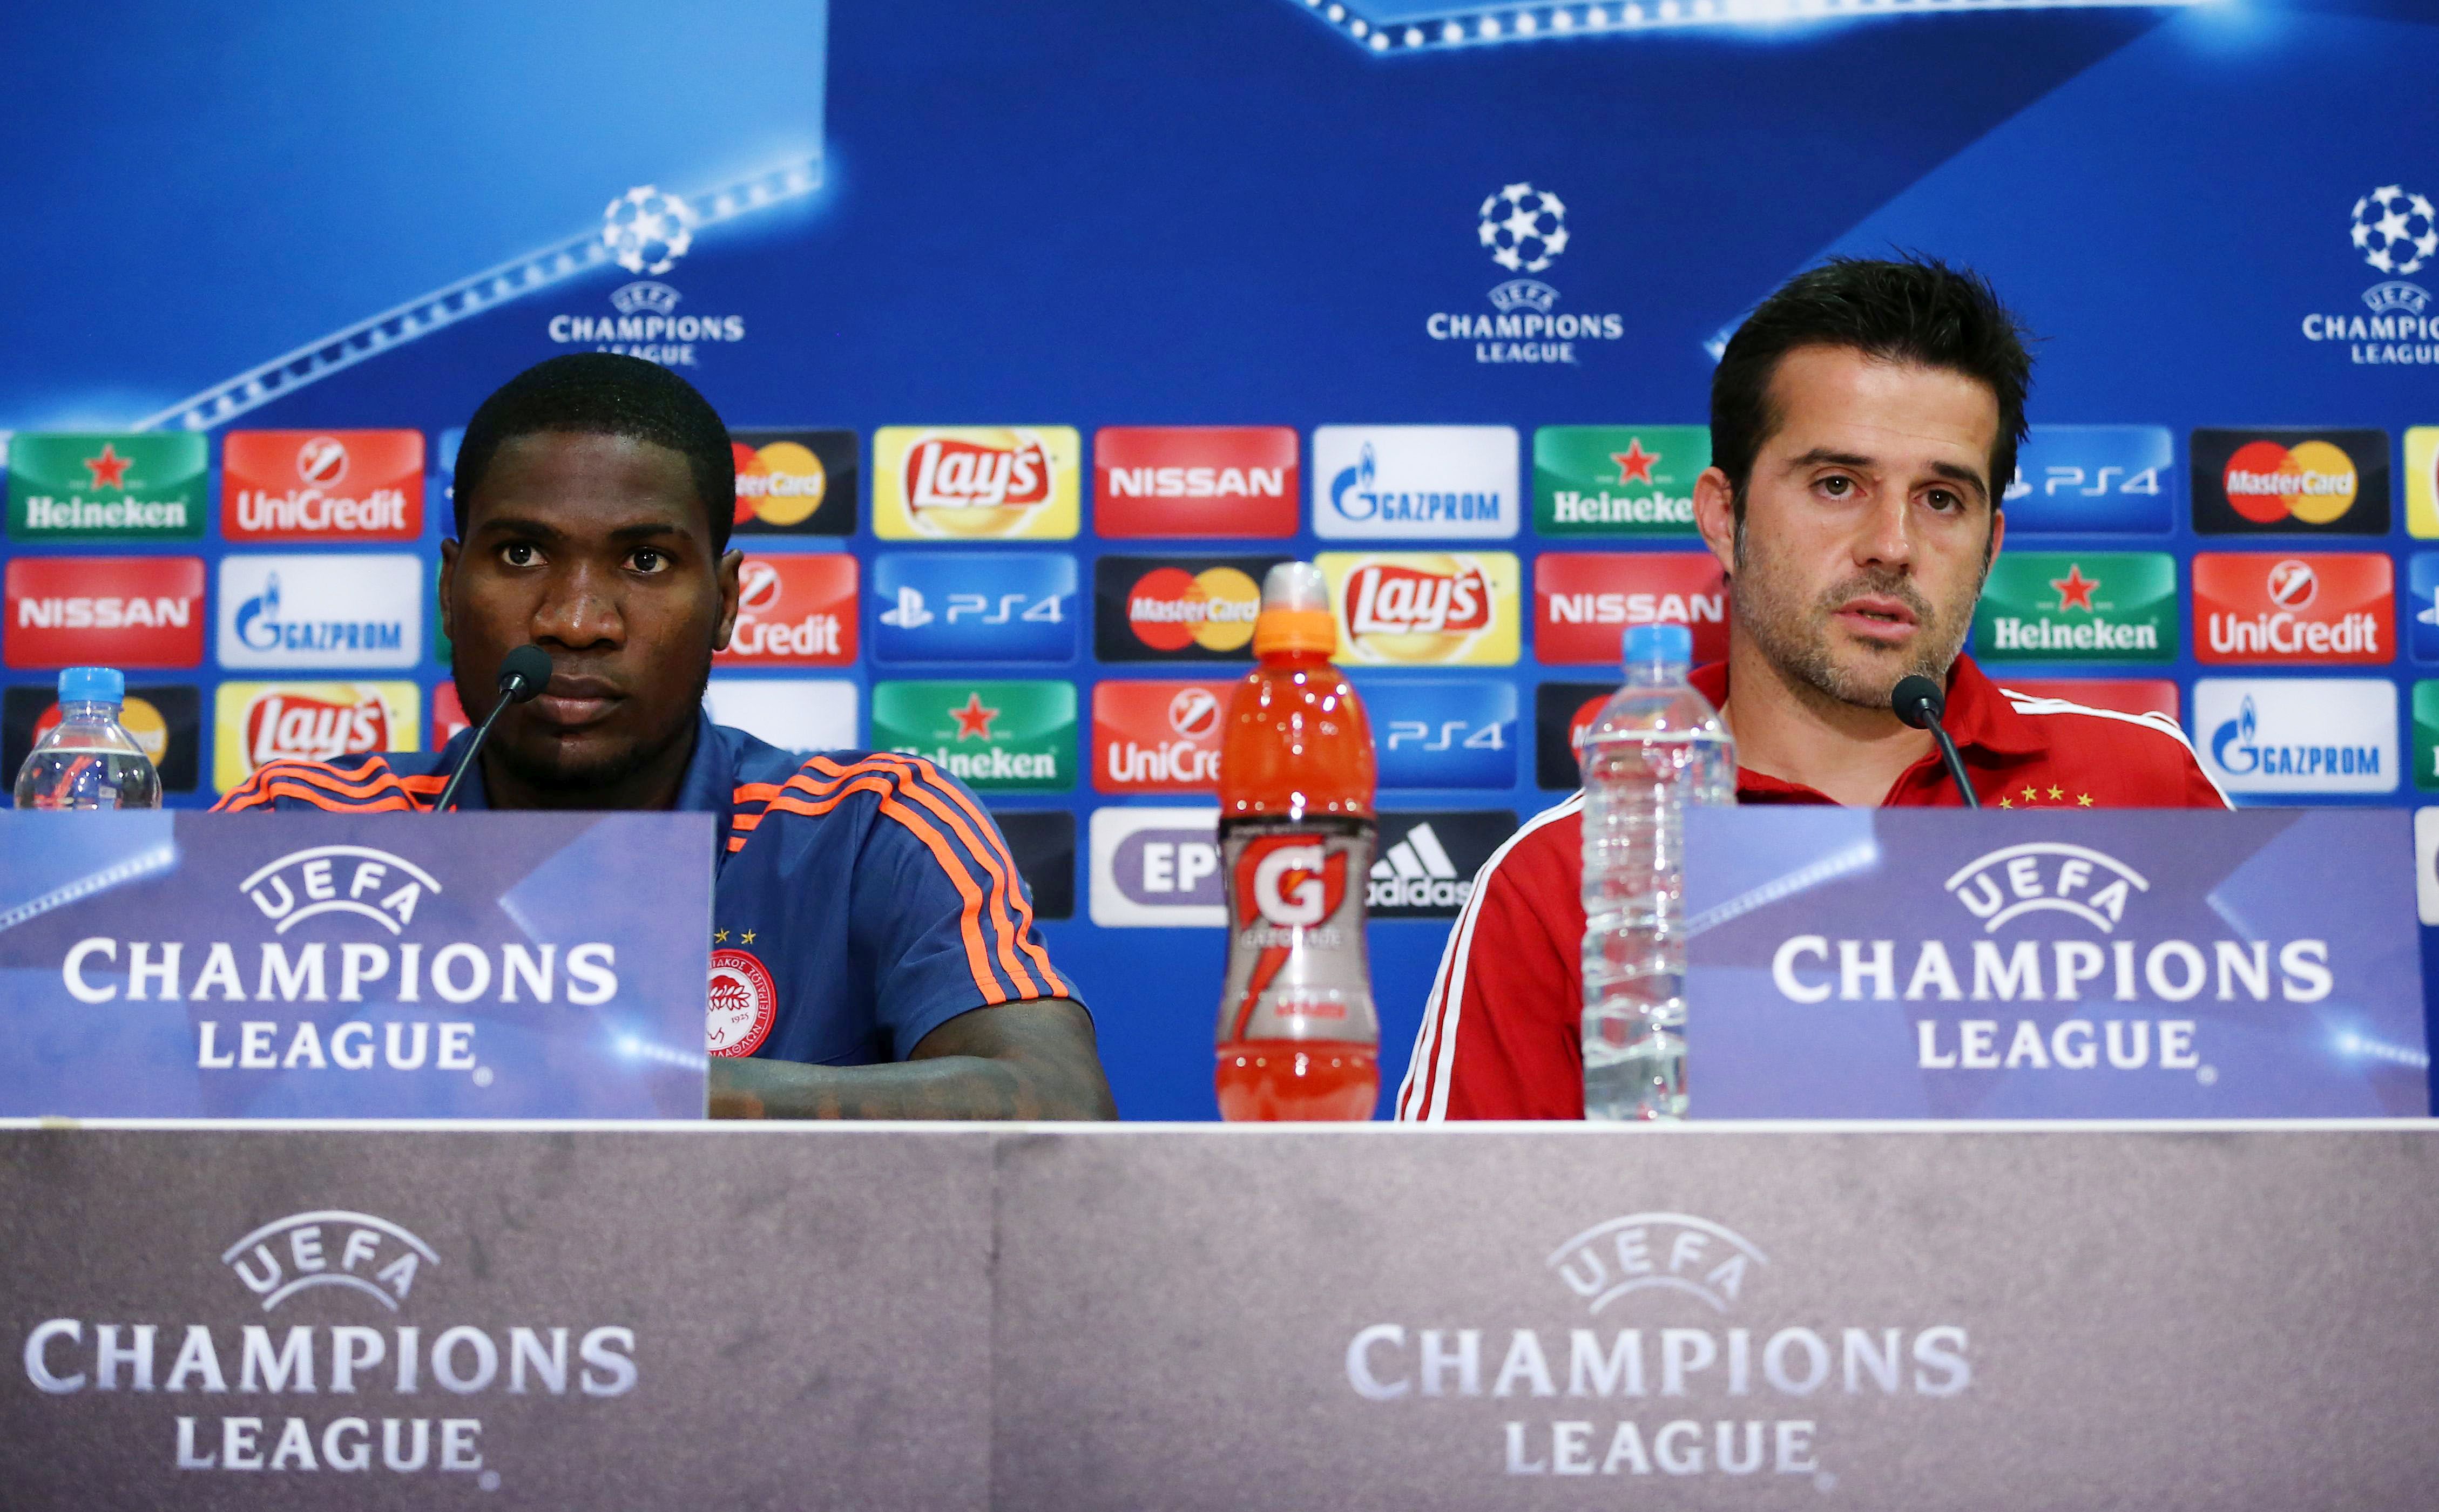 The press conference ahead of the match against Arsenal